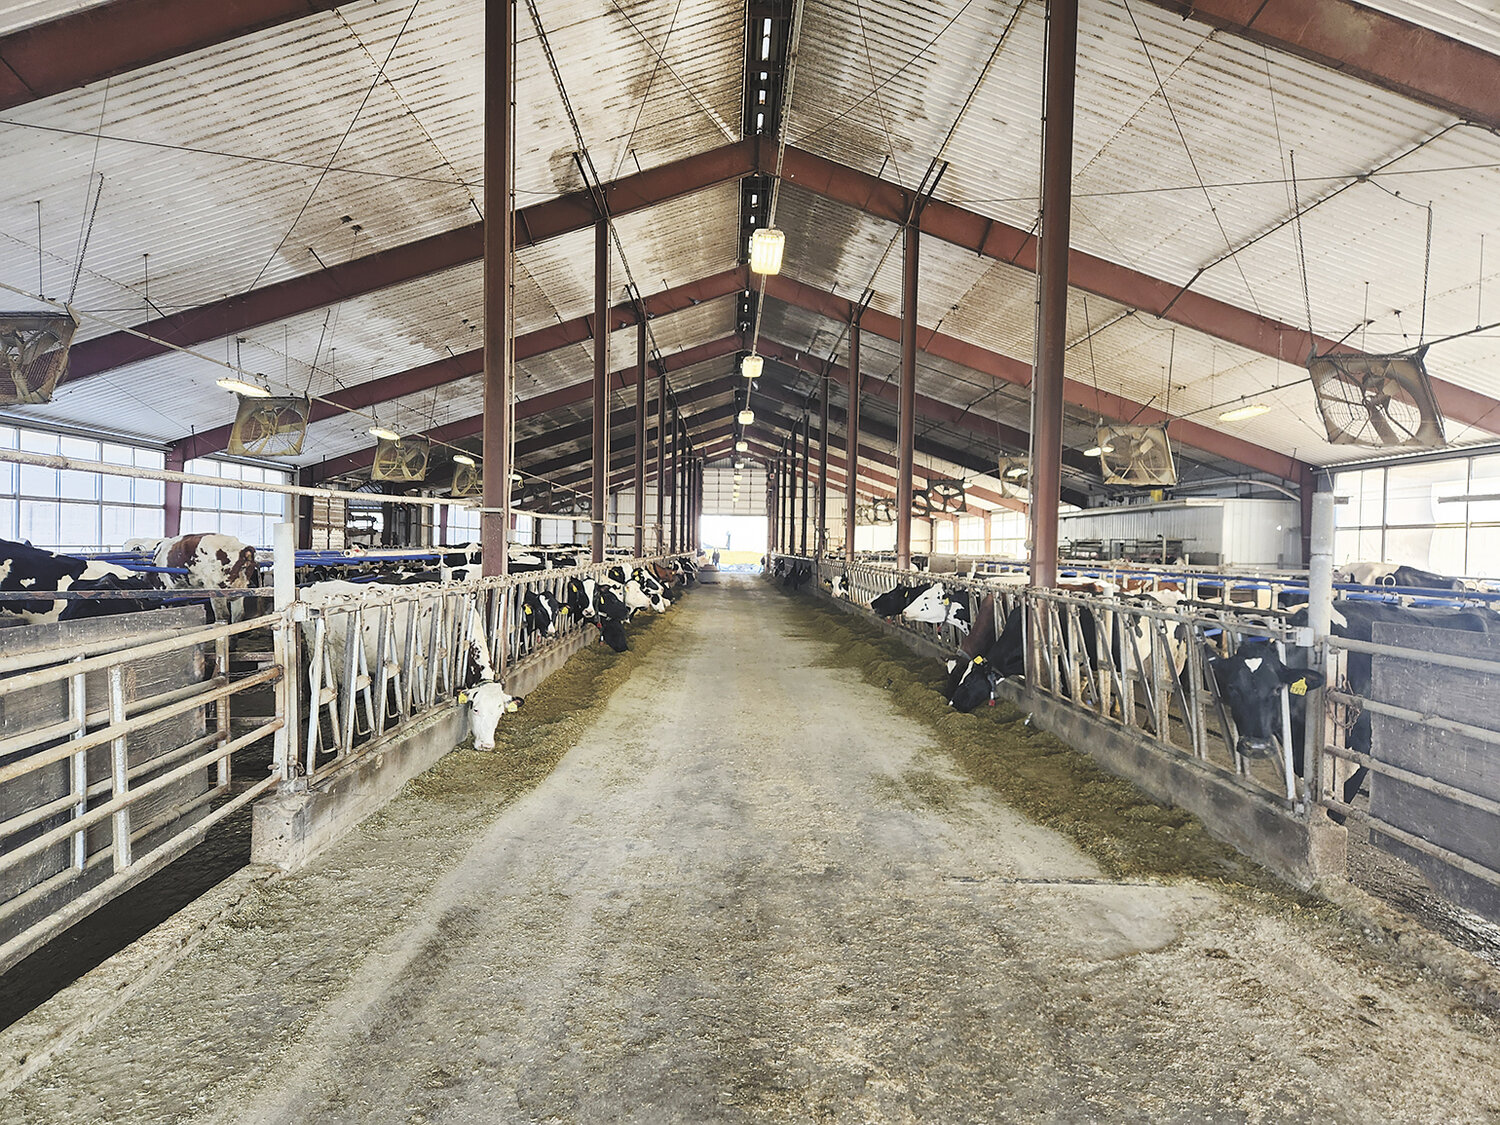 The barn at Pioneer Farm at the University of Wisconsin-Platteville houses 200 cows Jan. 31 near Platteville, Wisconsin. Half the herd is milked in a double-5 herringbone parlor, and the other half is milked in two Lely A5 robotic milking systems.